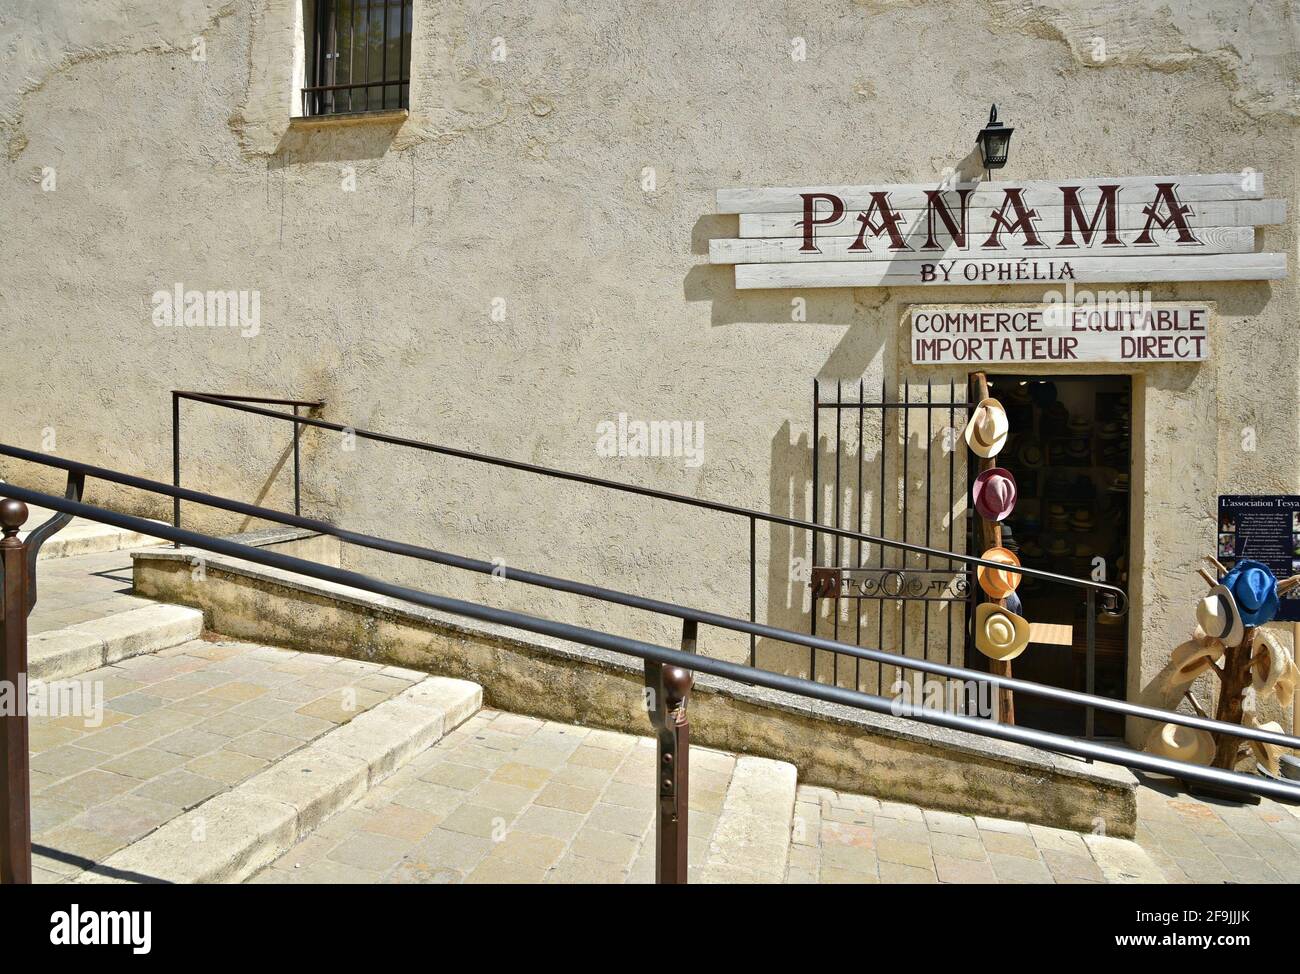 Panama hats local shop facade in the picturesque village of Lourmarin in Vaucluse, Provence France. Stock Photo